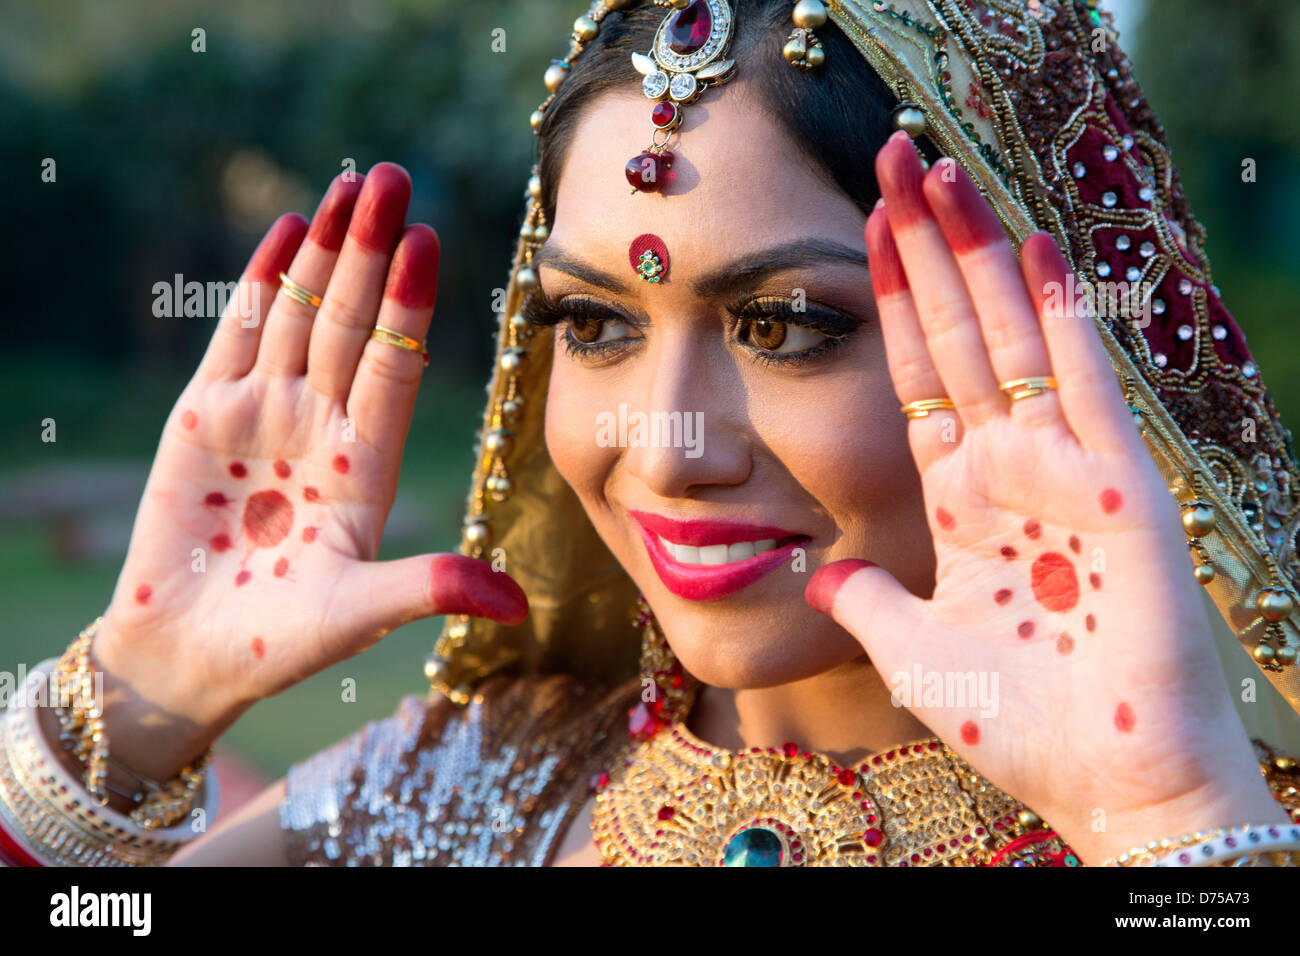 A Classic 2 States Wedding Of A Rajasthani Girl & A Tamil Boy | Indian  wedding couple, Wedding poses, La photography